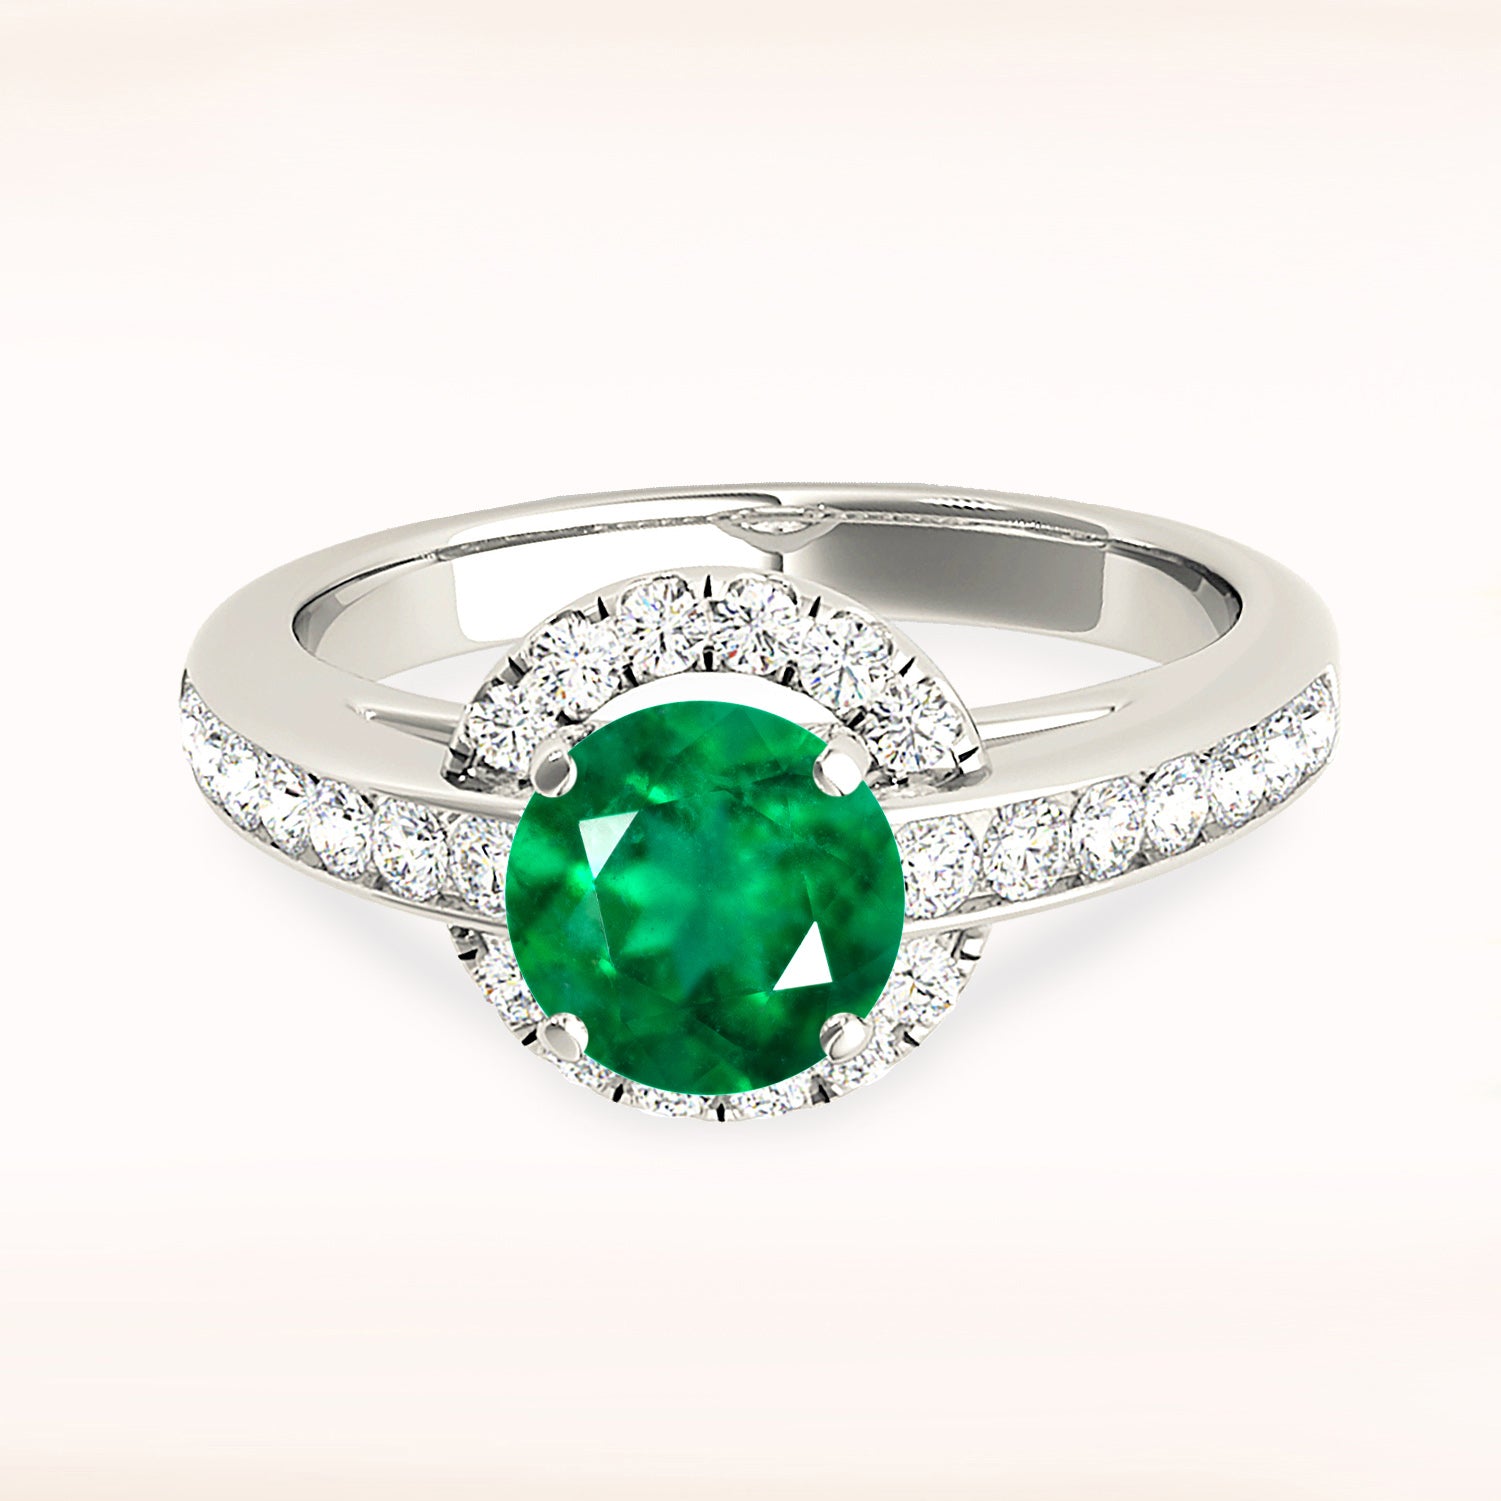 1.75 ct. Genuine Emerald Ring With 0.40 ctw. Diamond Halo, Channel Set Diamond Band-in 14K/18K White, Yellow, Rose Gold and Platinum - Christmas Jewelry Gift -VIRABYANI